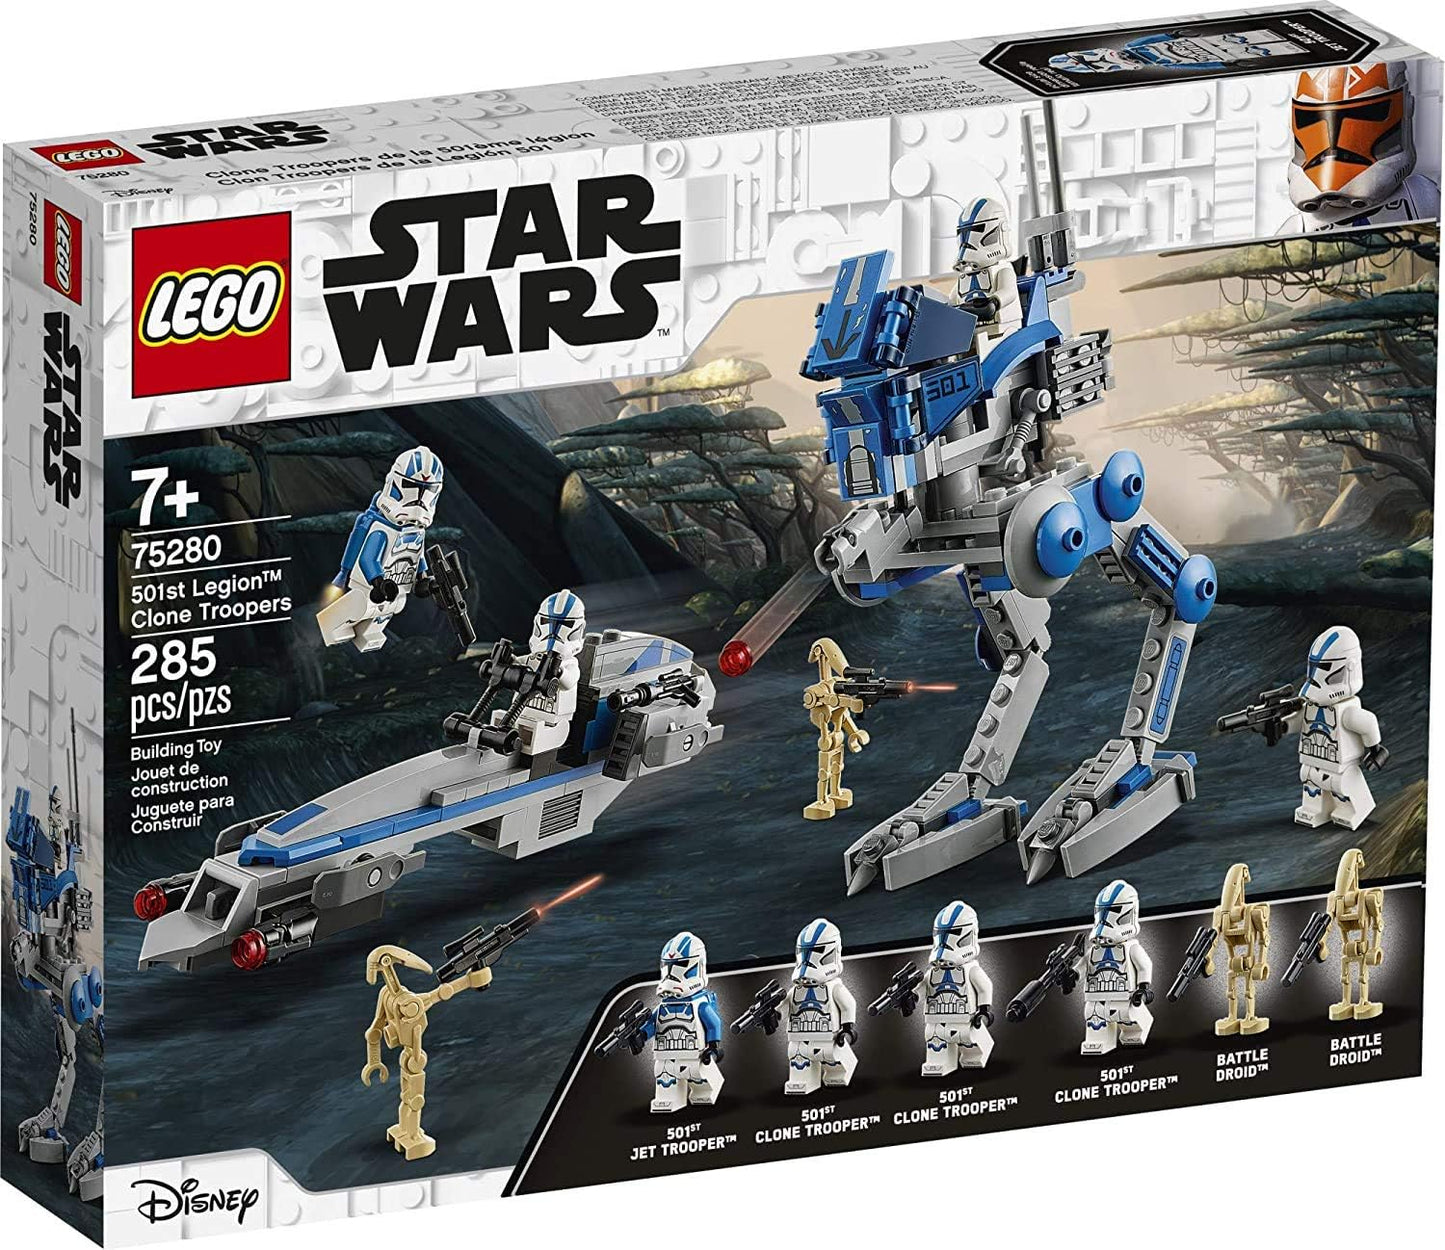 LEGO Star Wars 501st Legion Clone Troopers 75280 Building Kit, Cool Action Set for Creative Play and Awesome Building (285 Pieces) - Venus Trendy Fashion Online